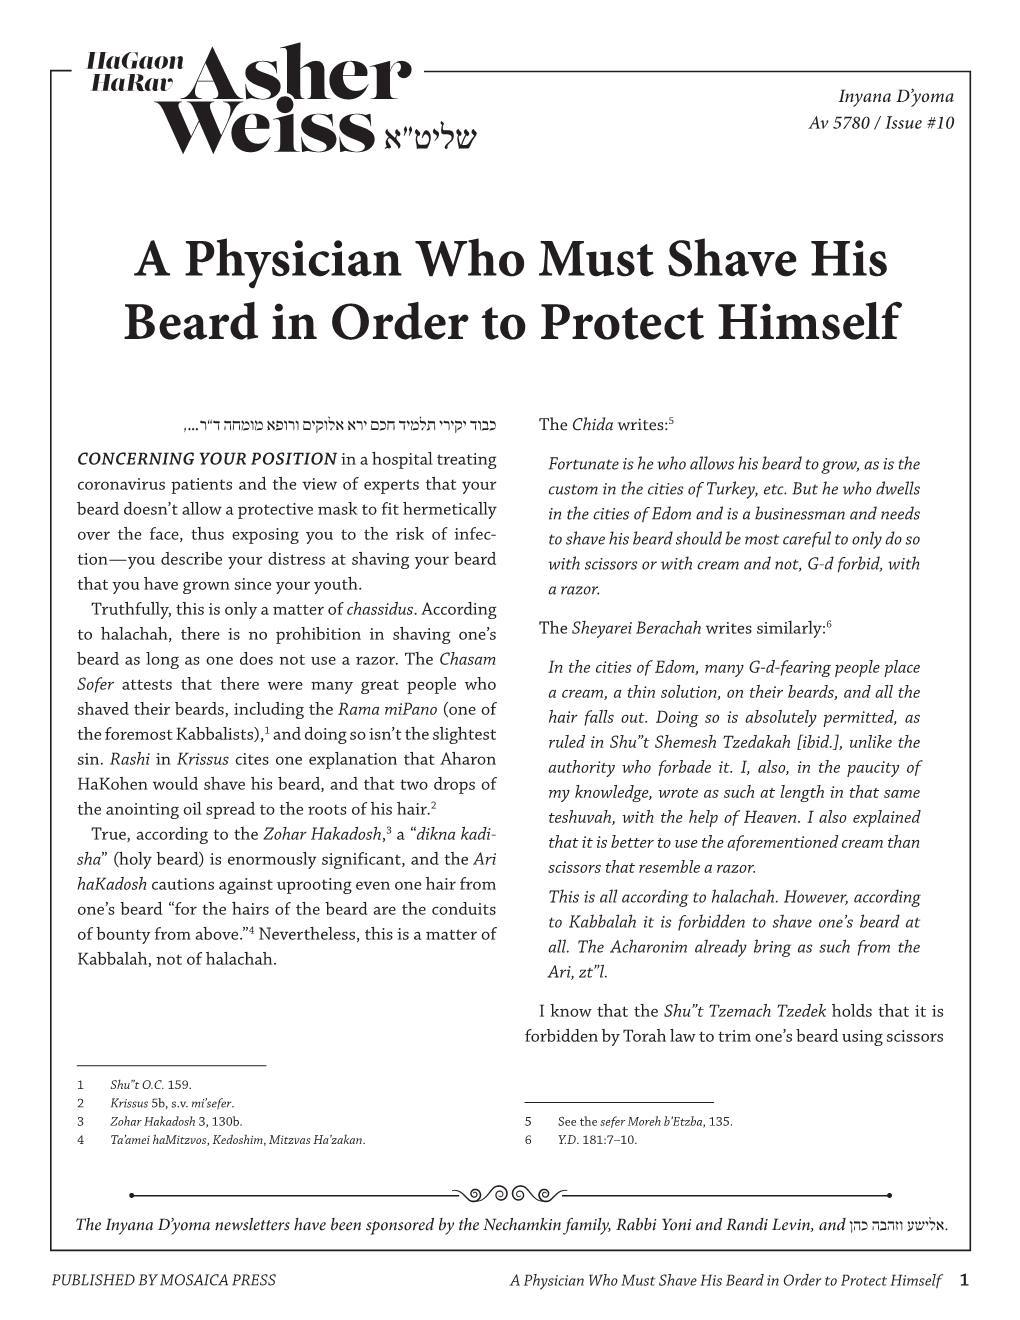 A Physician Who Must Shave His Beard in Order to Protect Himself